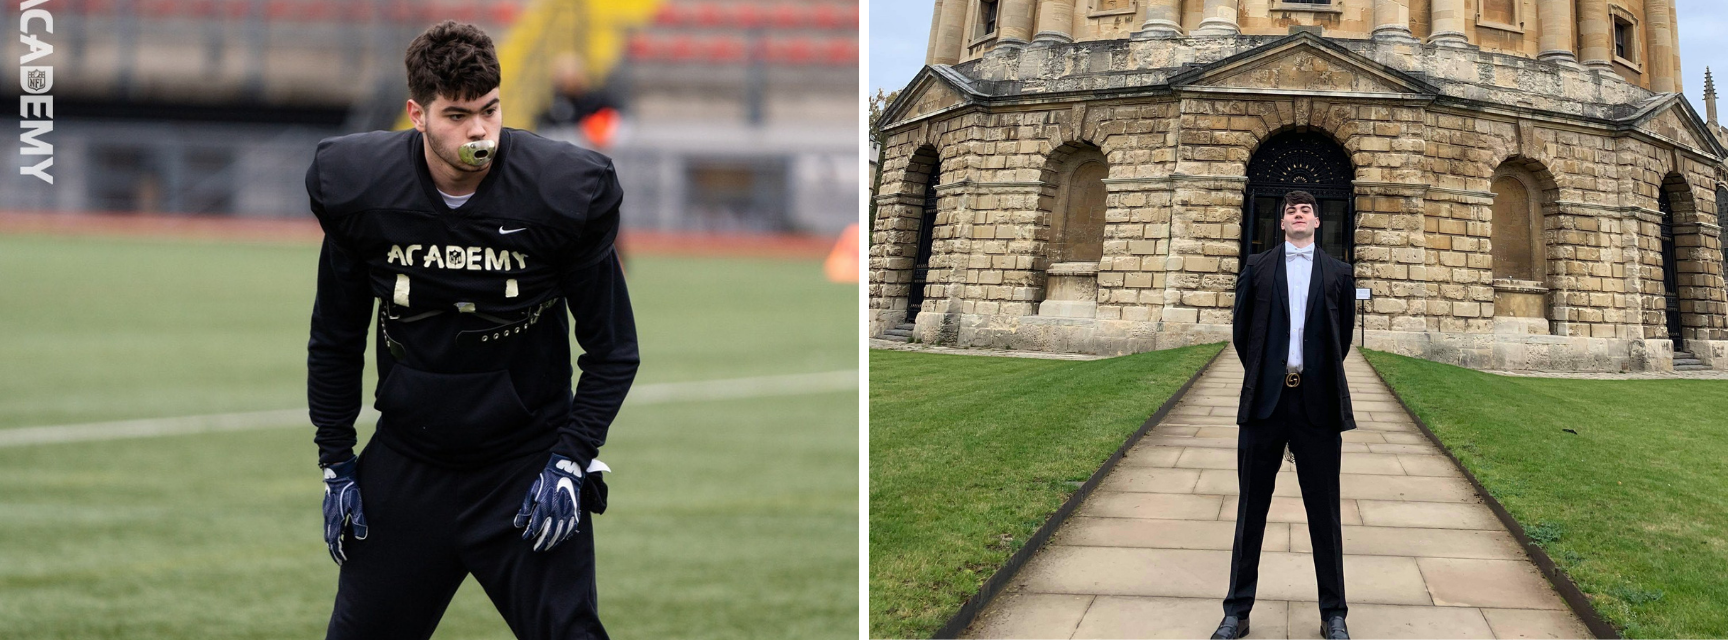 One image of Alex Greenhalgh in American Football kit stood on a pitch and another of him in academic dress